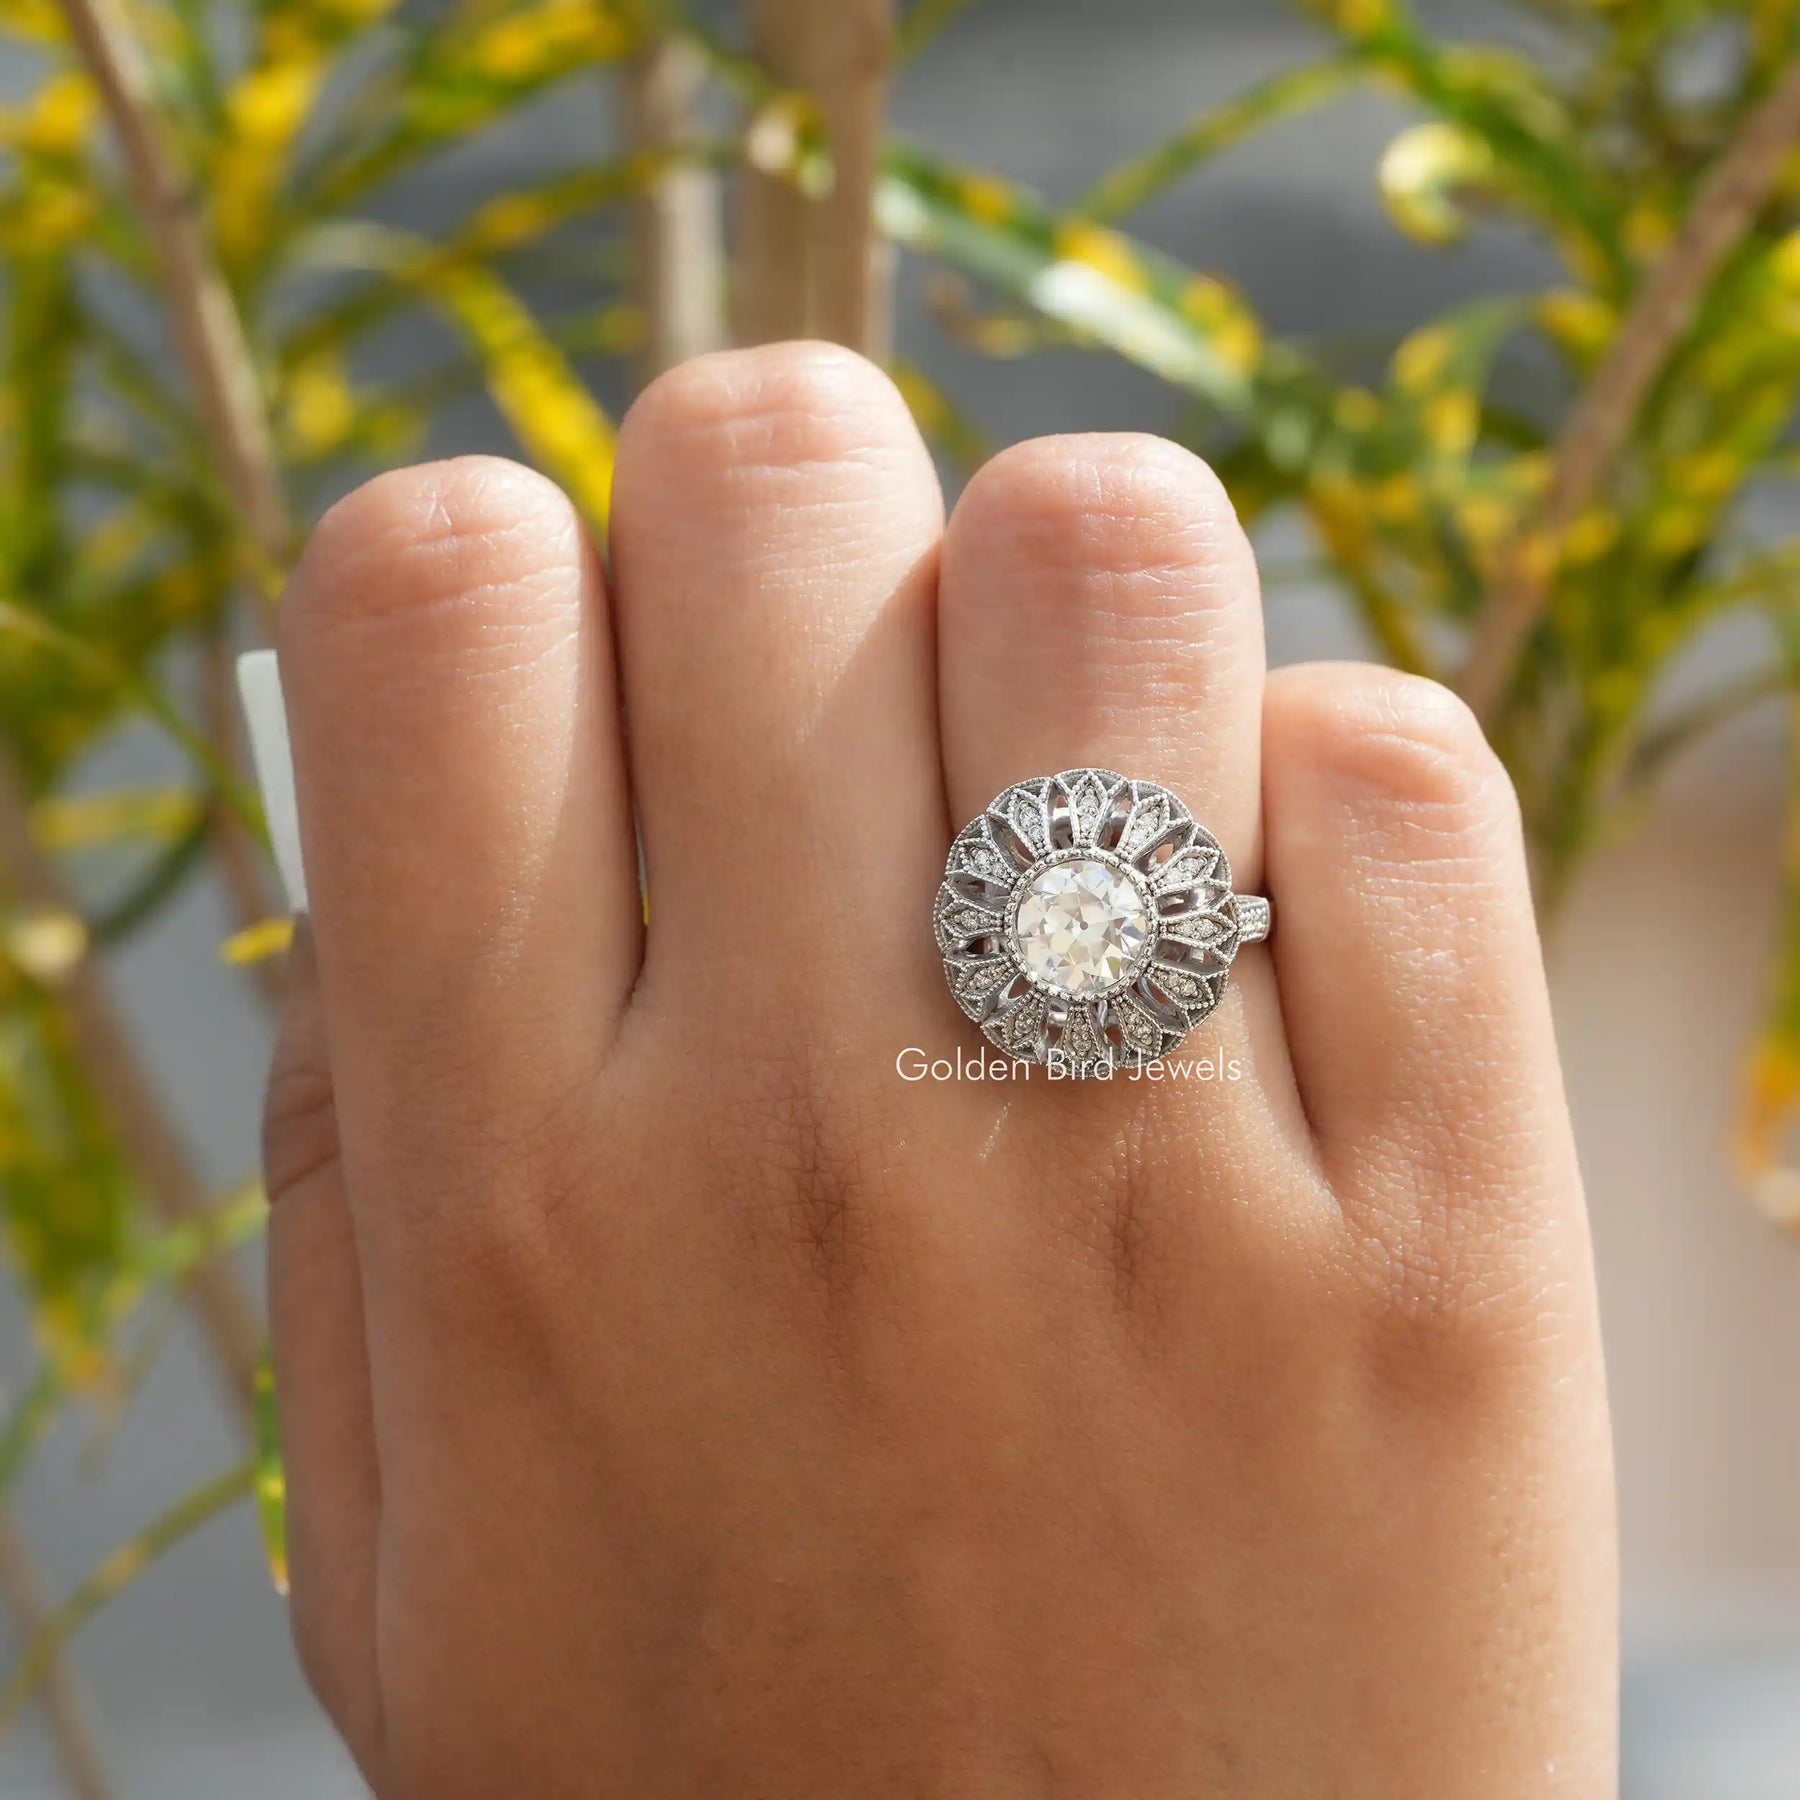 [Moissanite Round Cut Floral Style Vintage Ring]-[Golden Bird Jewels]